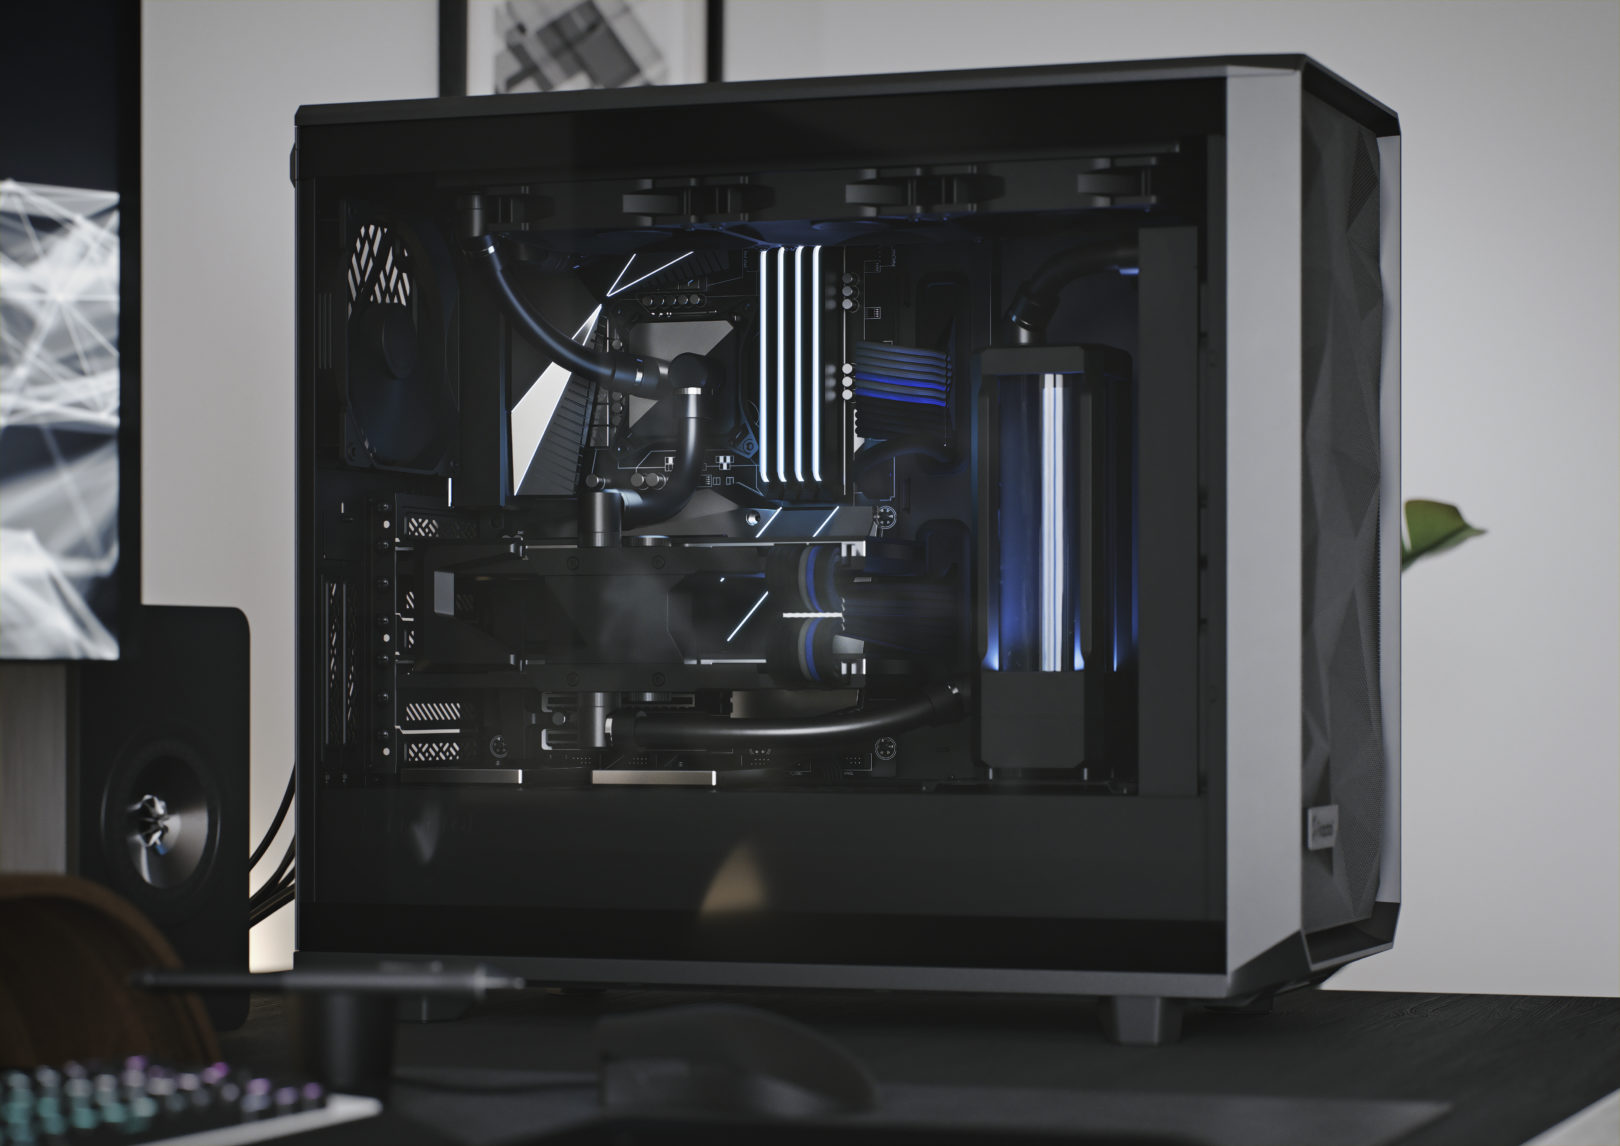 Fractal Design North hands-on: The PC case with Wife Approval